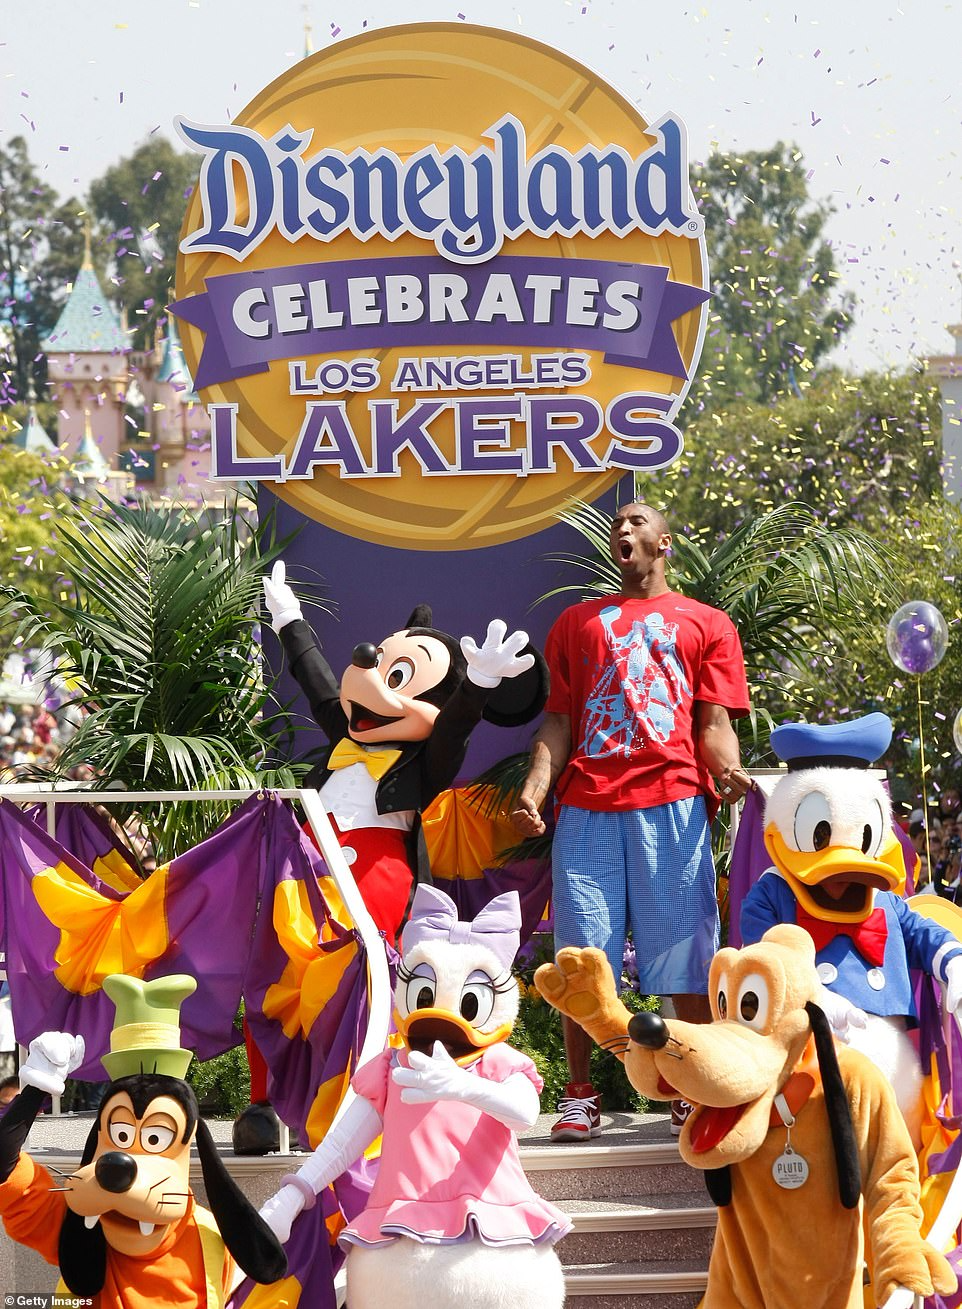 Kobe Bryant's magical family moment: Celebrating the Lakers' NBA championship victory at Disneyland with his wife Vanessa and daughters Natalia and Gianna in 2010